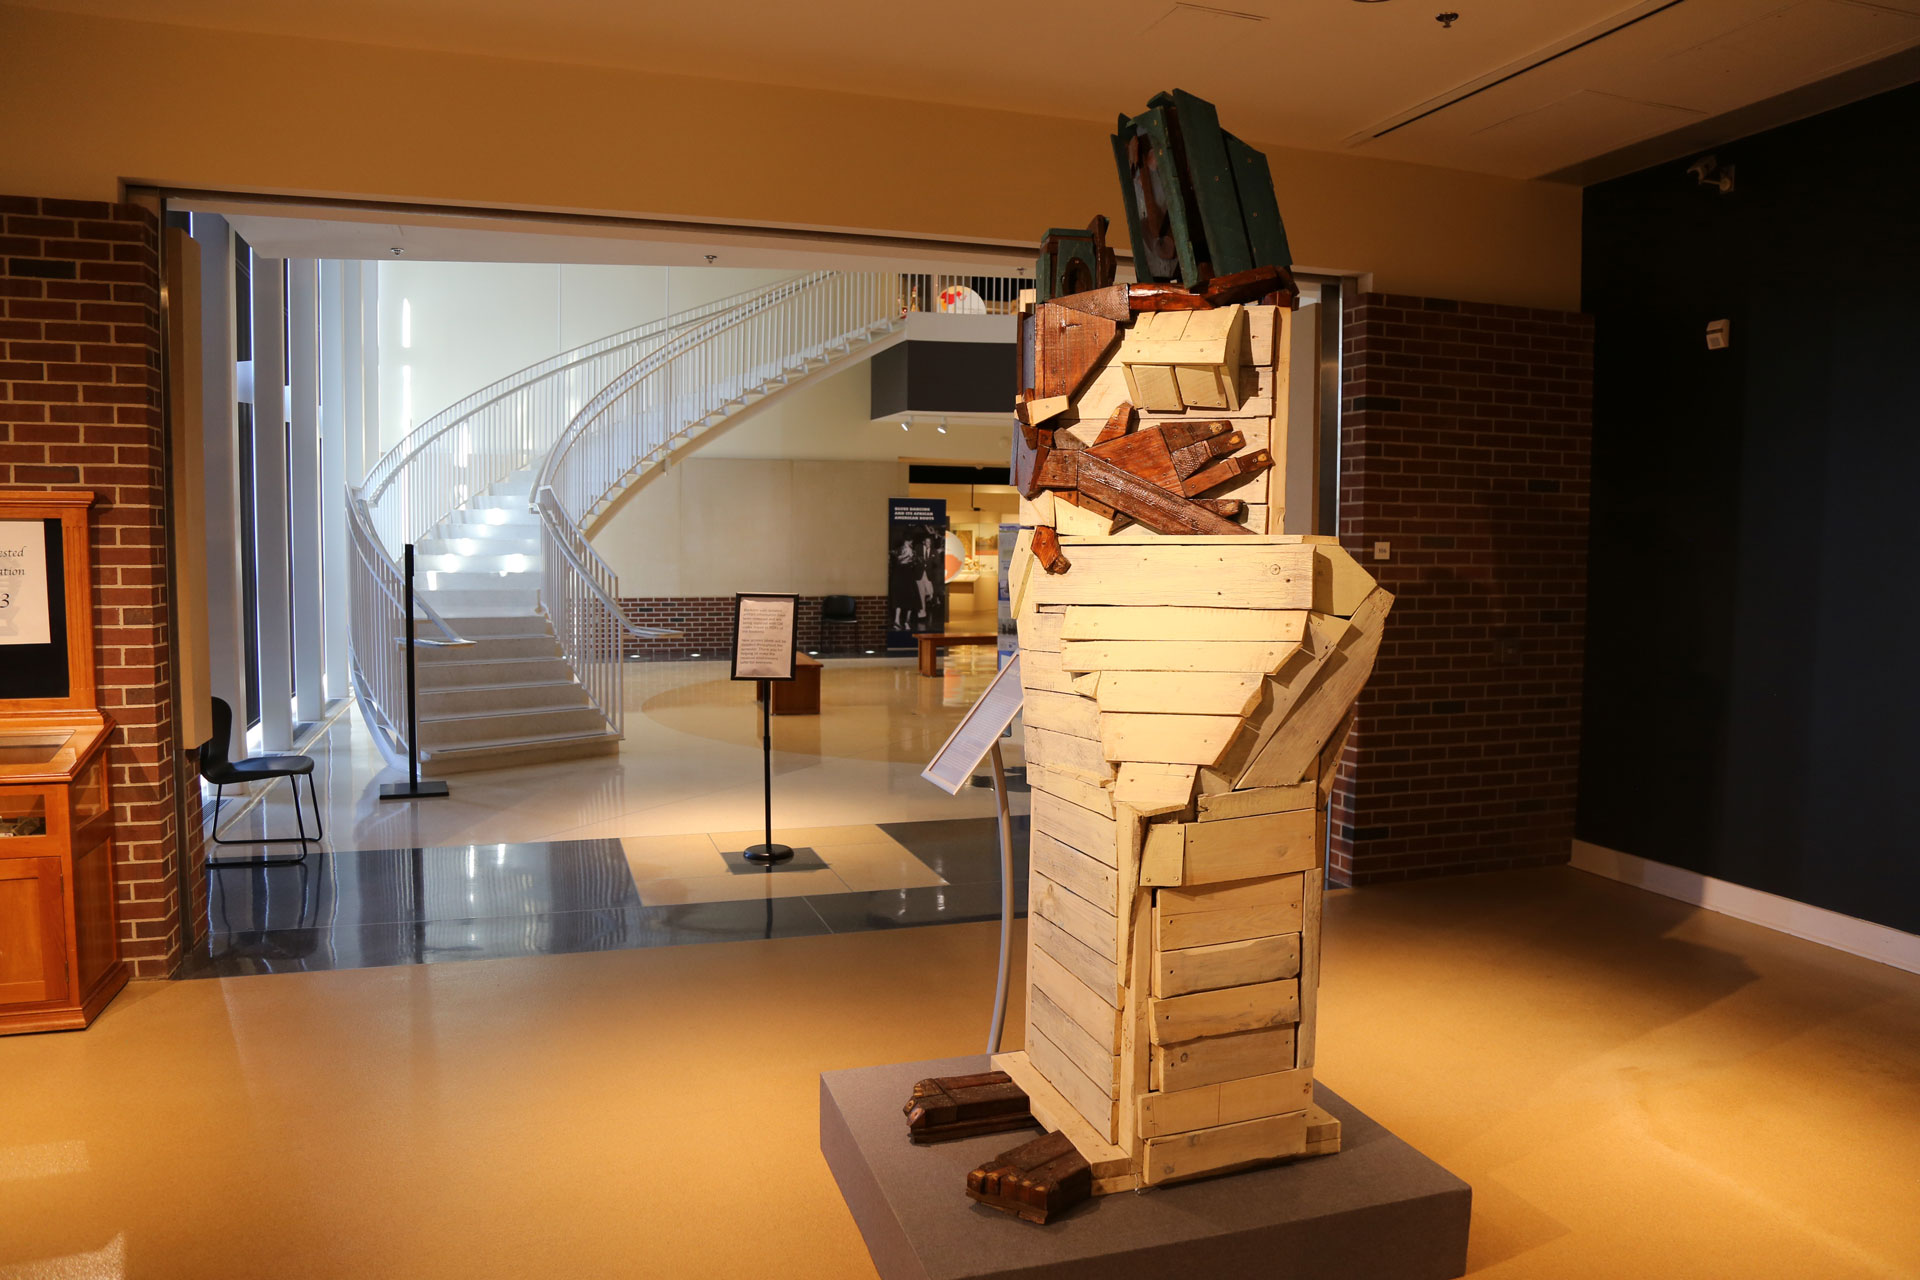 A side, further view of the Mother and Child artwork with the center lobby of Spurlock in the background